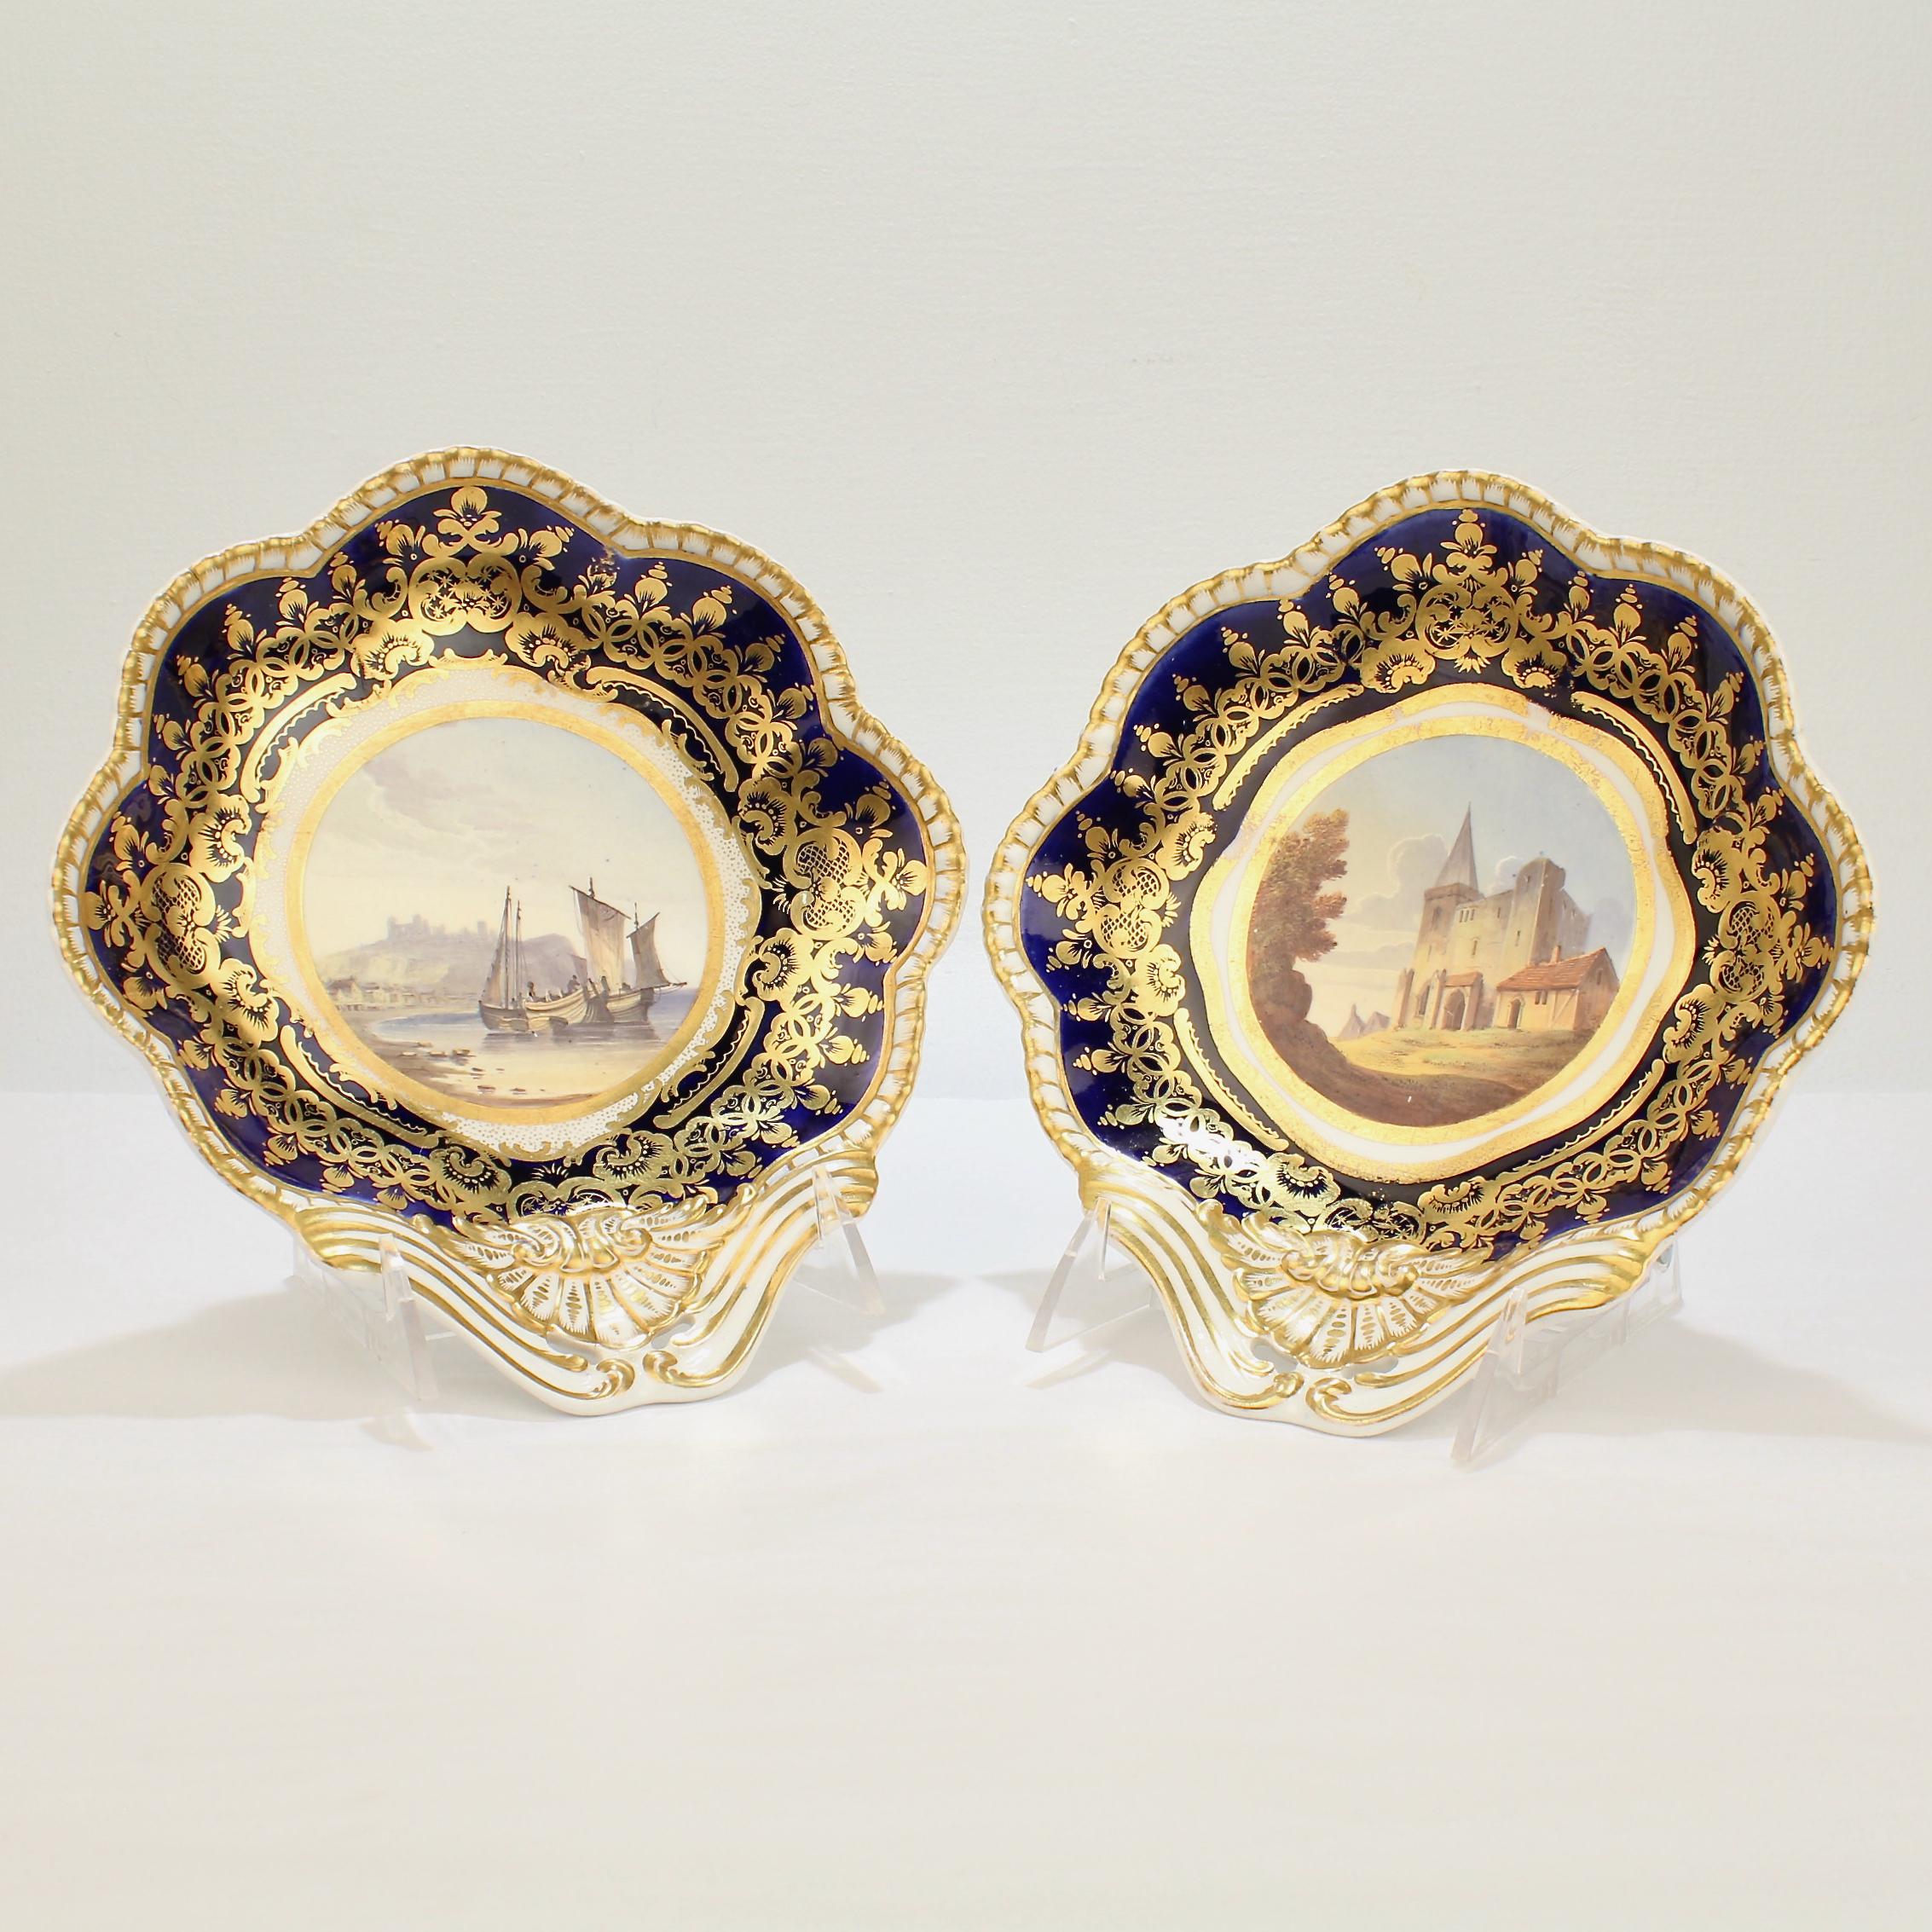 A very Fine pair of Spode porcelain shrimp bowls.

With rich gilding, underglaze cobalt blue borders, and hand painted topographical scenes at their centers.

One scene depicts fishing boats in the bay at Dover Castle. The other depicts a scene